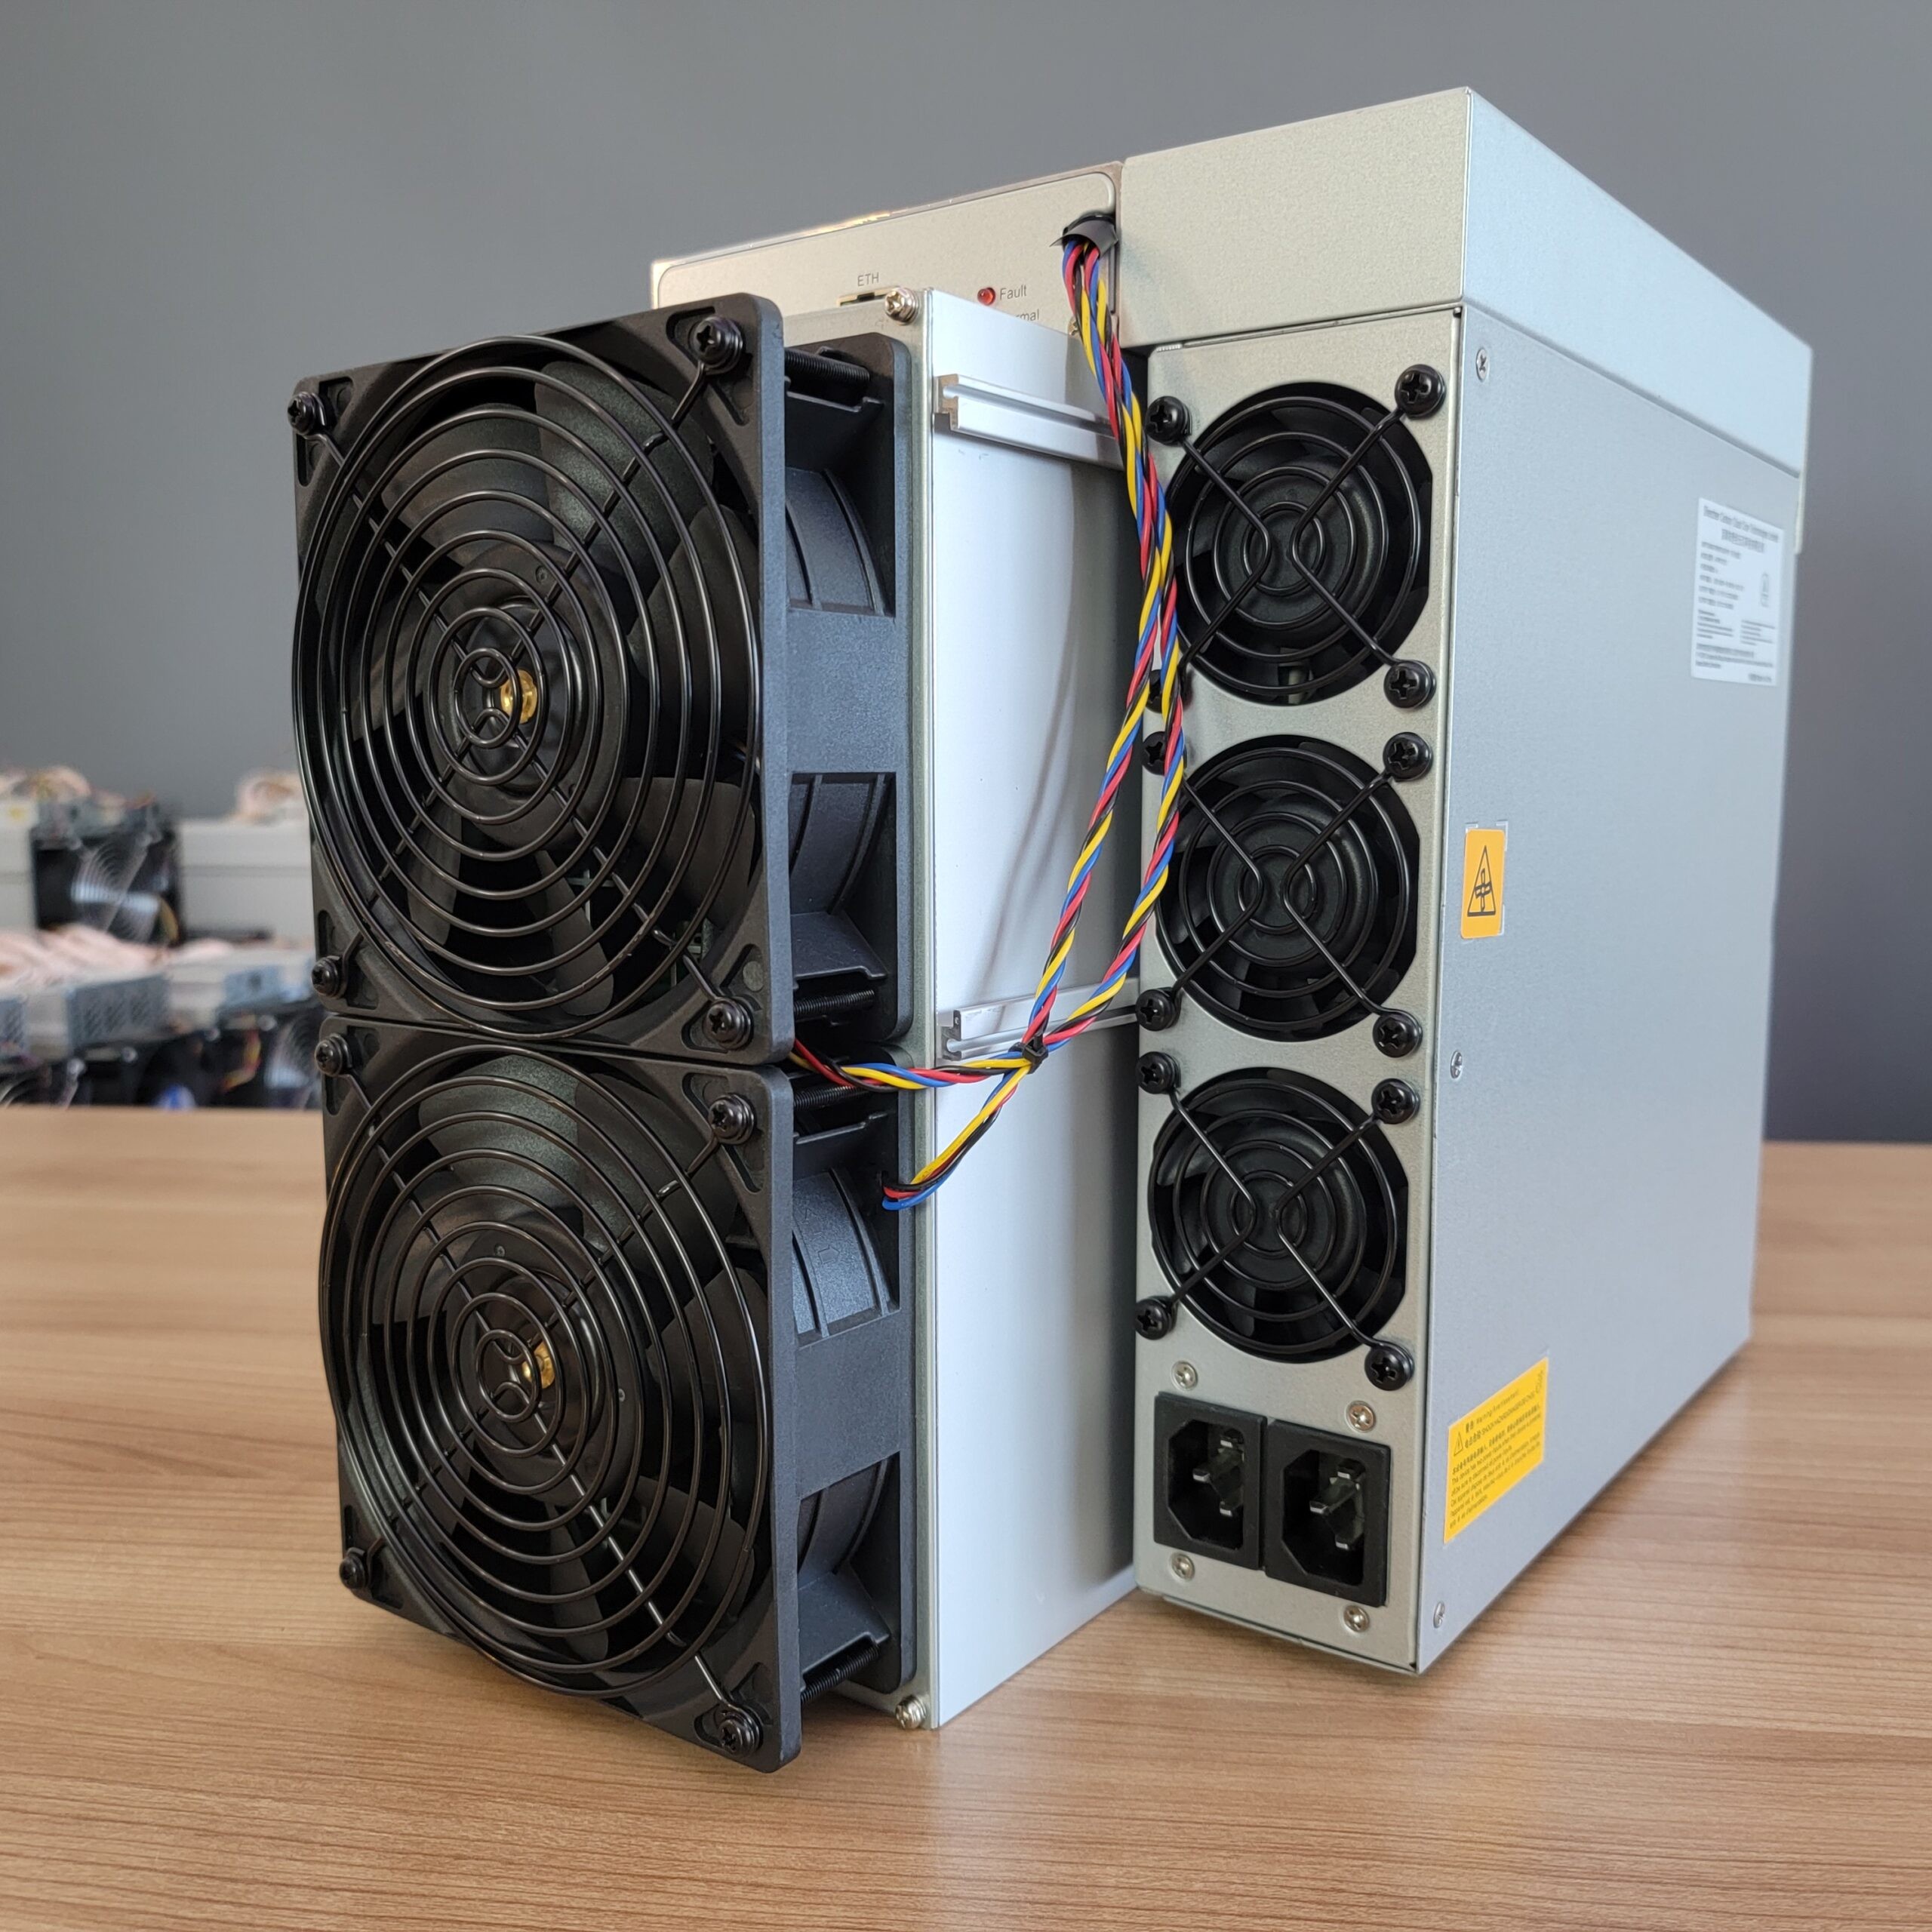 Antminer t21 190 th s. ASIC Bitmain Antminer s19 Pro. Antminer l7 9500mh/s. Antminer s19j Pro 104th. Antminer Bitmain s19 Pro 110th.